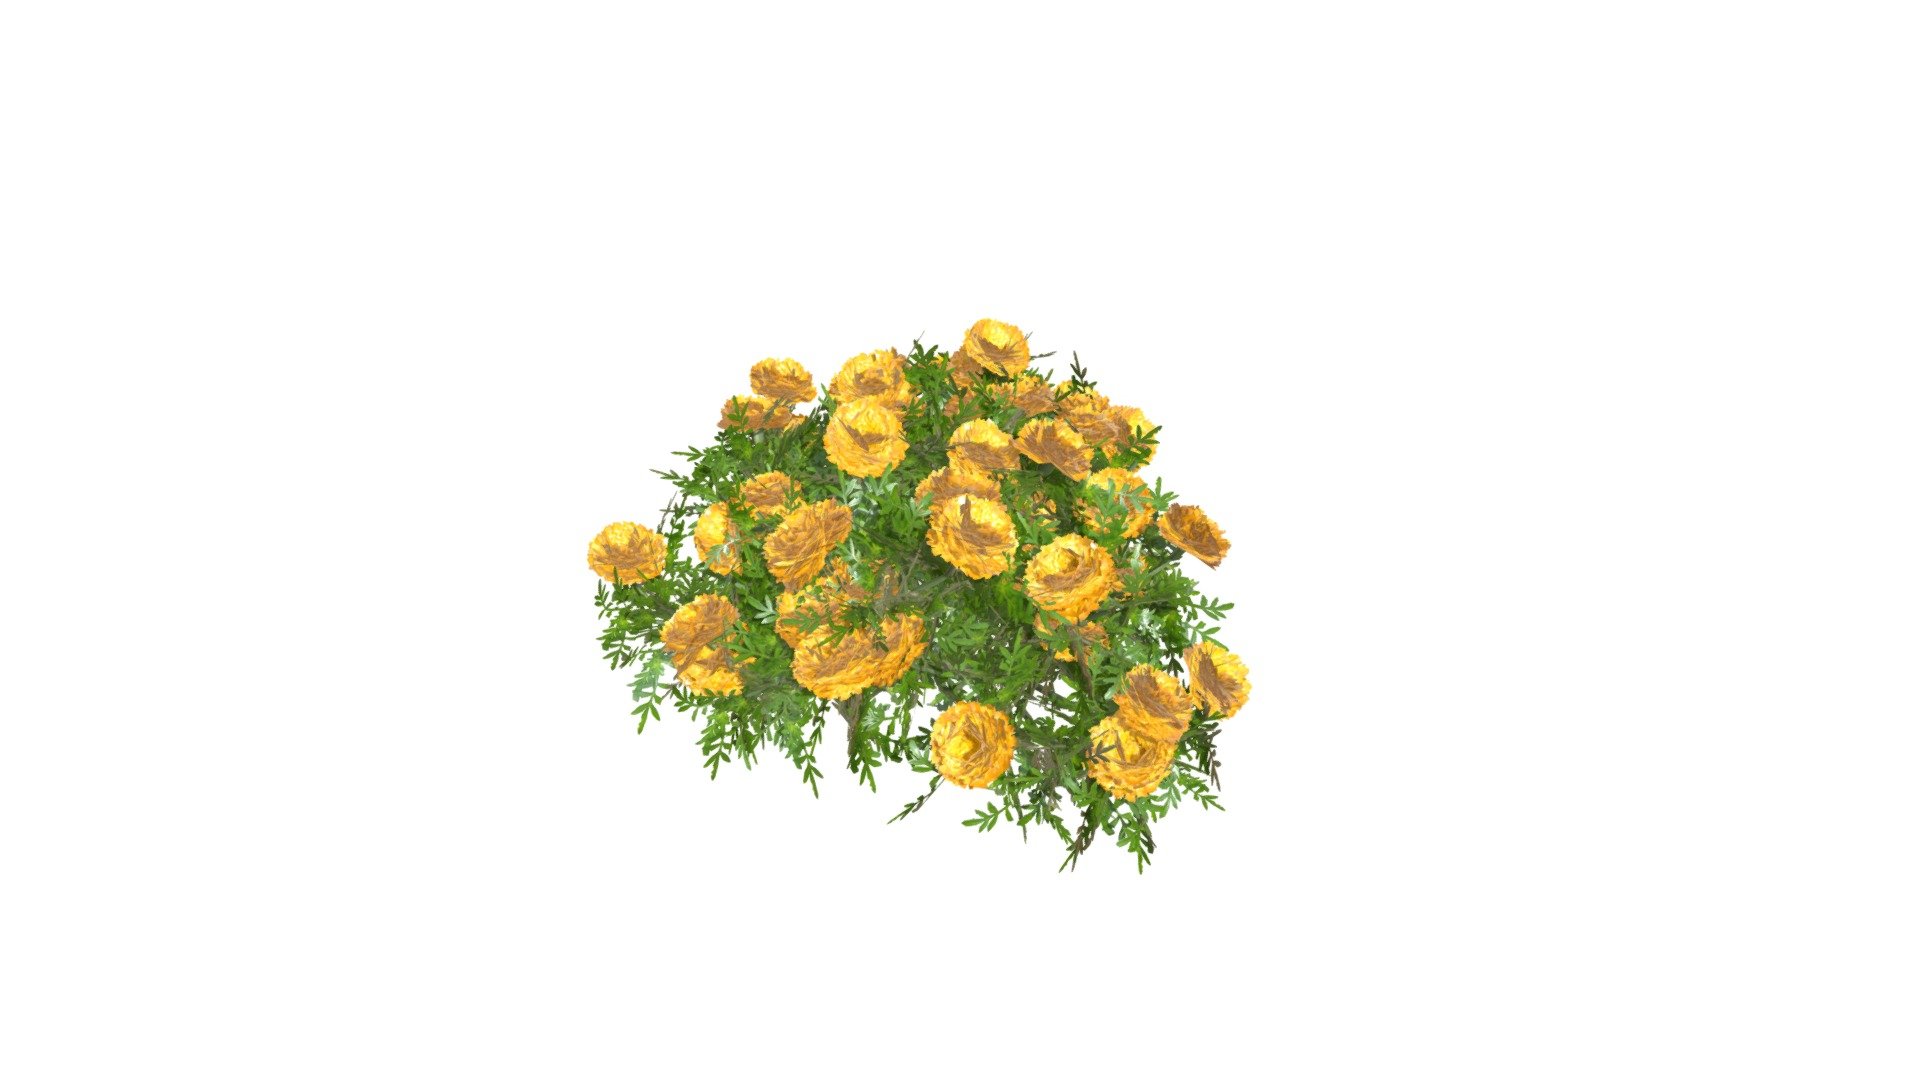 Breathe life into your scenes with these captivating marigold flower models!
This collection brings you four stunning marigolds, each meticulously crafted with low-poly efficiency and packed with rich detail. Immerse your projects in the vibrant hues of Deep Orange and Mary Helen varieties, boasting fiery sunsets and sunshine-kissed blends.

*Deep Orange:
Bask in the warmth of a fiery orange bloom, its subtle petal variations adding depth and realism.

All models share these exceptional features:
Optimized low-poly design for efficient rendering in games, animations, and architectural visualizations.
High-quality textures boasting realistic colors, roughness, and PBR materials for physically based rendering.
*Available in multiple file formats for seamless integration into your workflow.

Check out this animation I made using Unreal Engine:
https://youtu.be/3QdakicUx4I - Deep Orange Marigold 02 - Buy Royalty Free 3D model by hkhalif 3d model